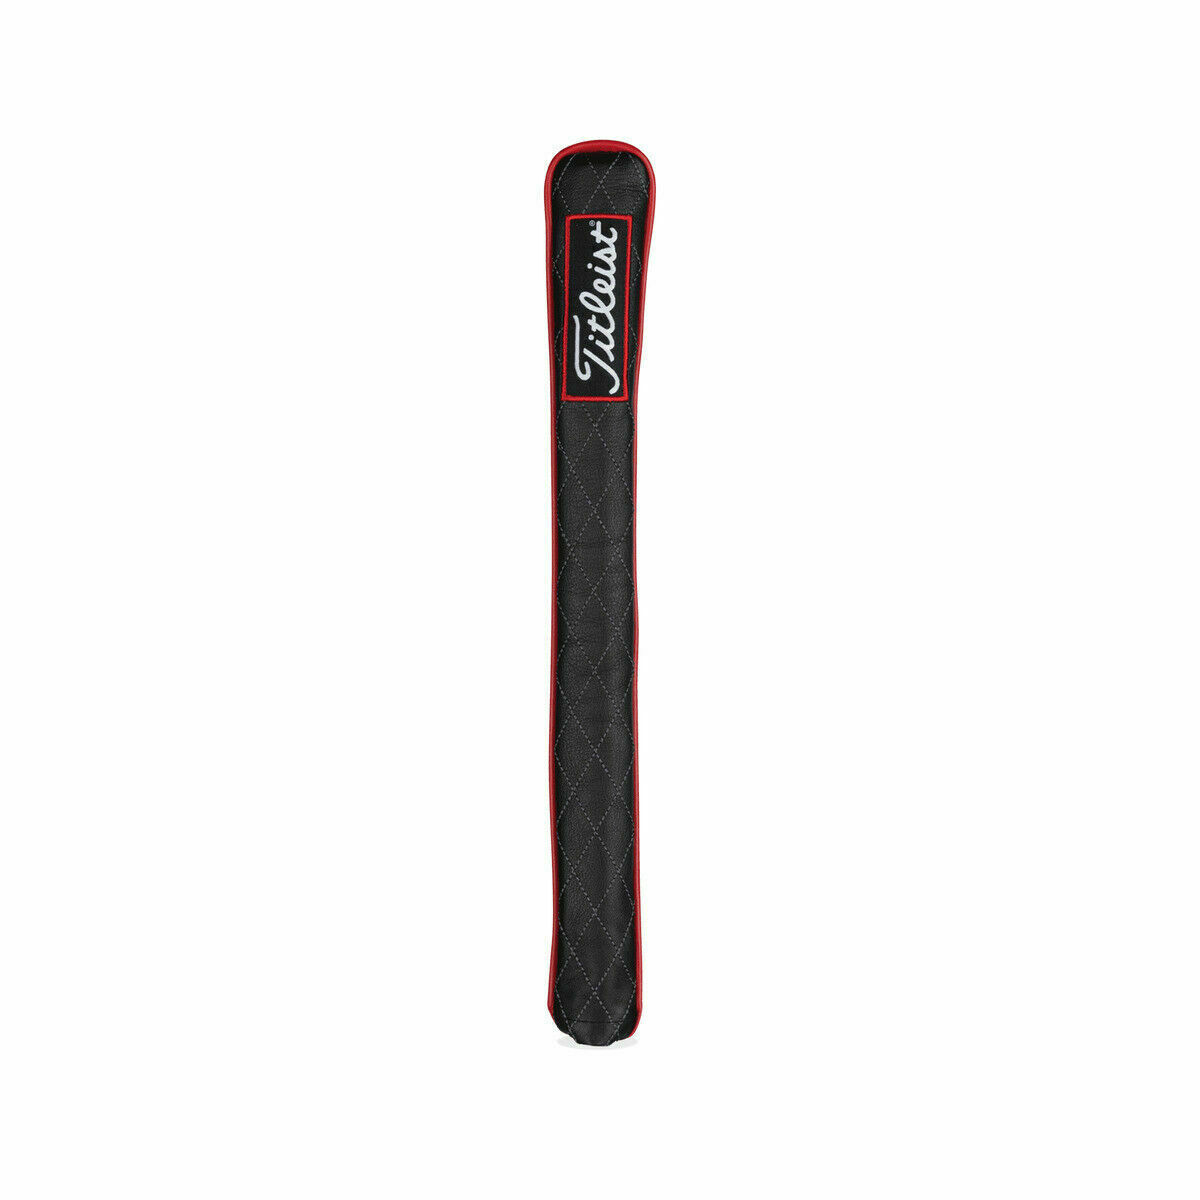 New Limited Titleist Jet Black Hand Crafted Deluxe Leather Alignment Stick Cover